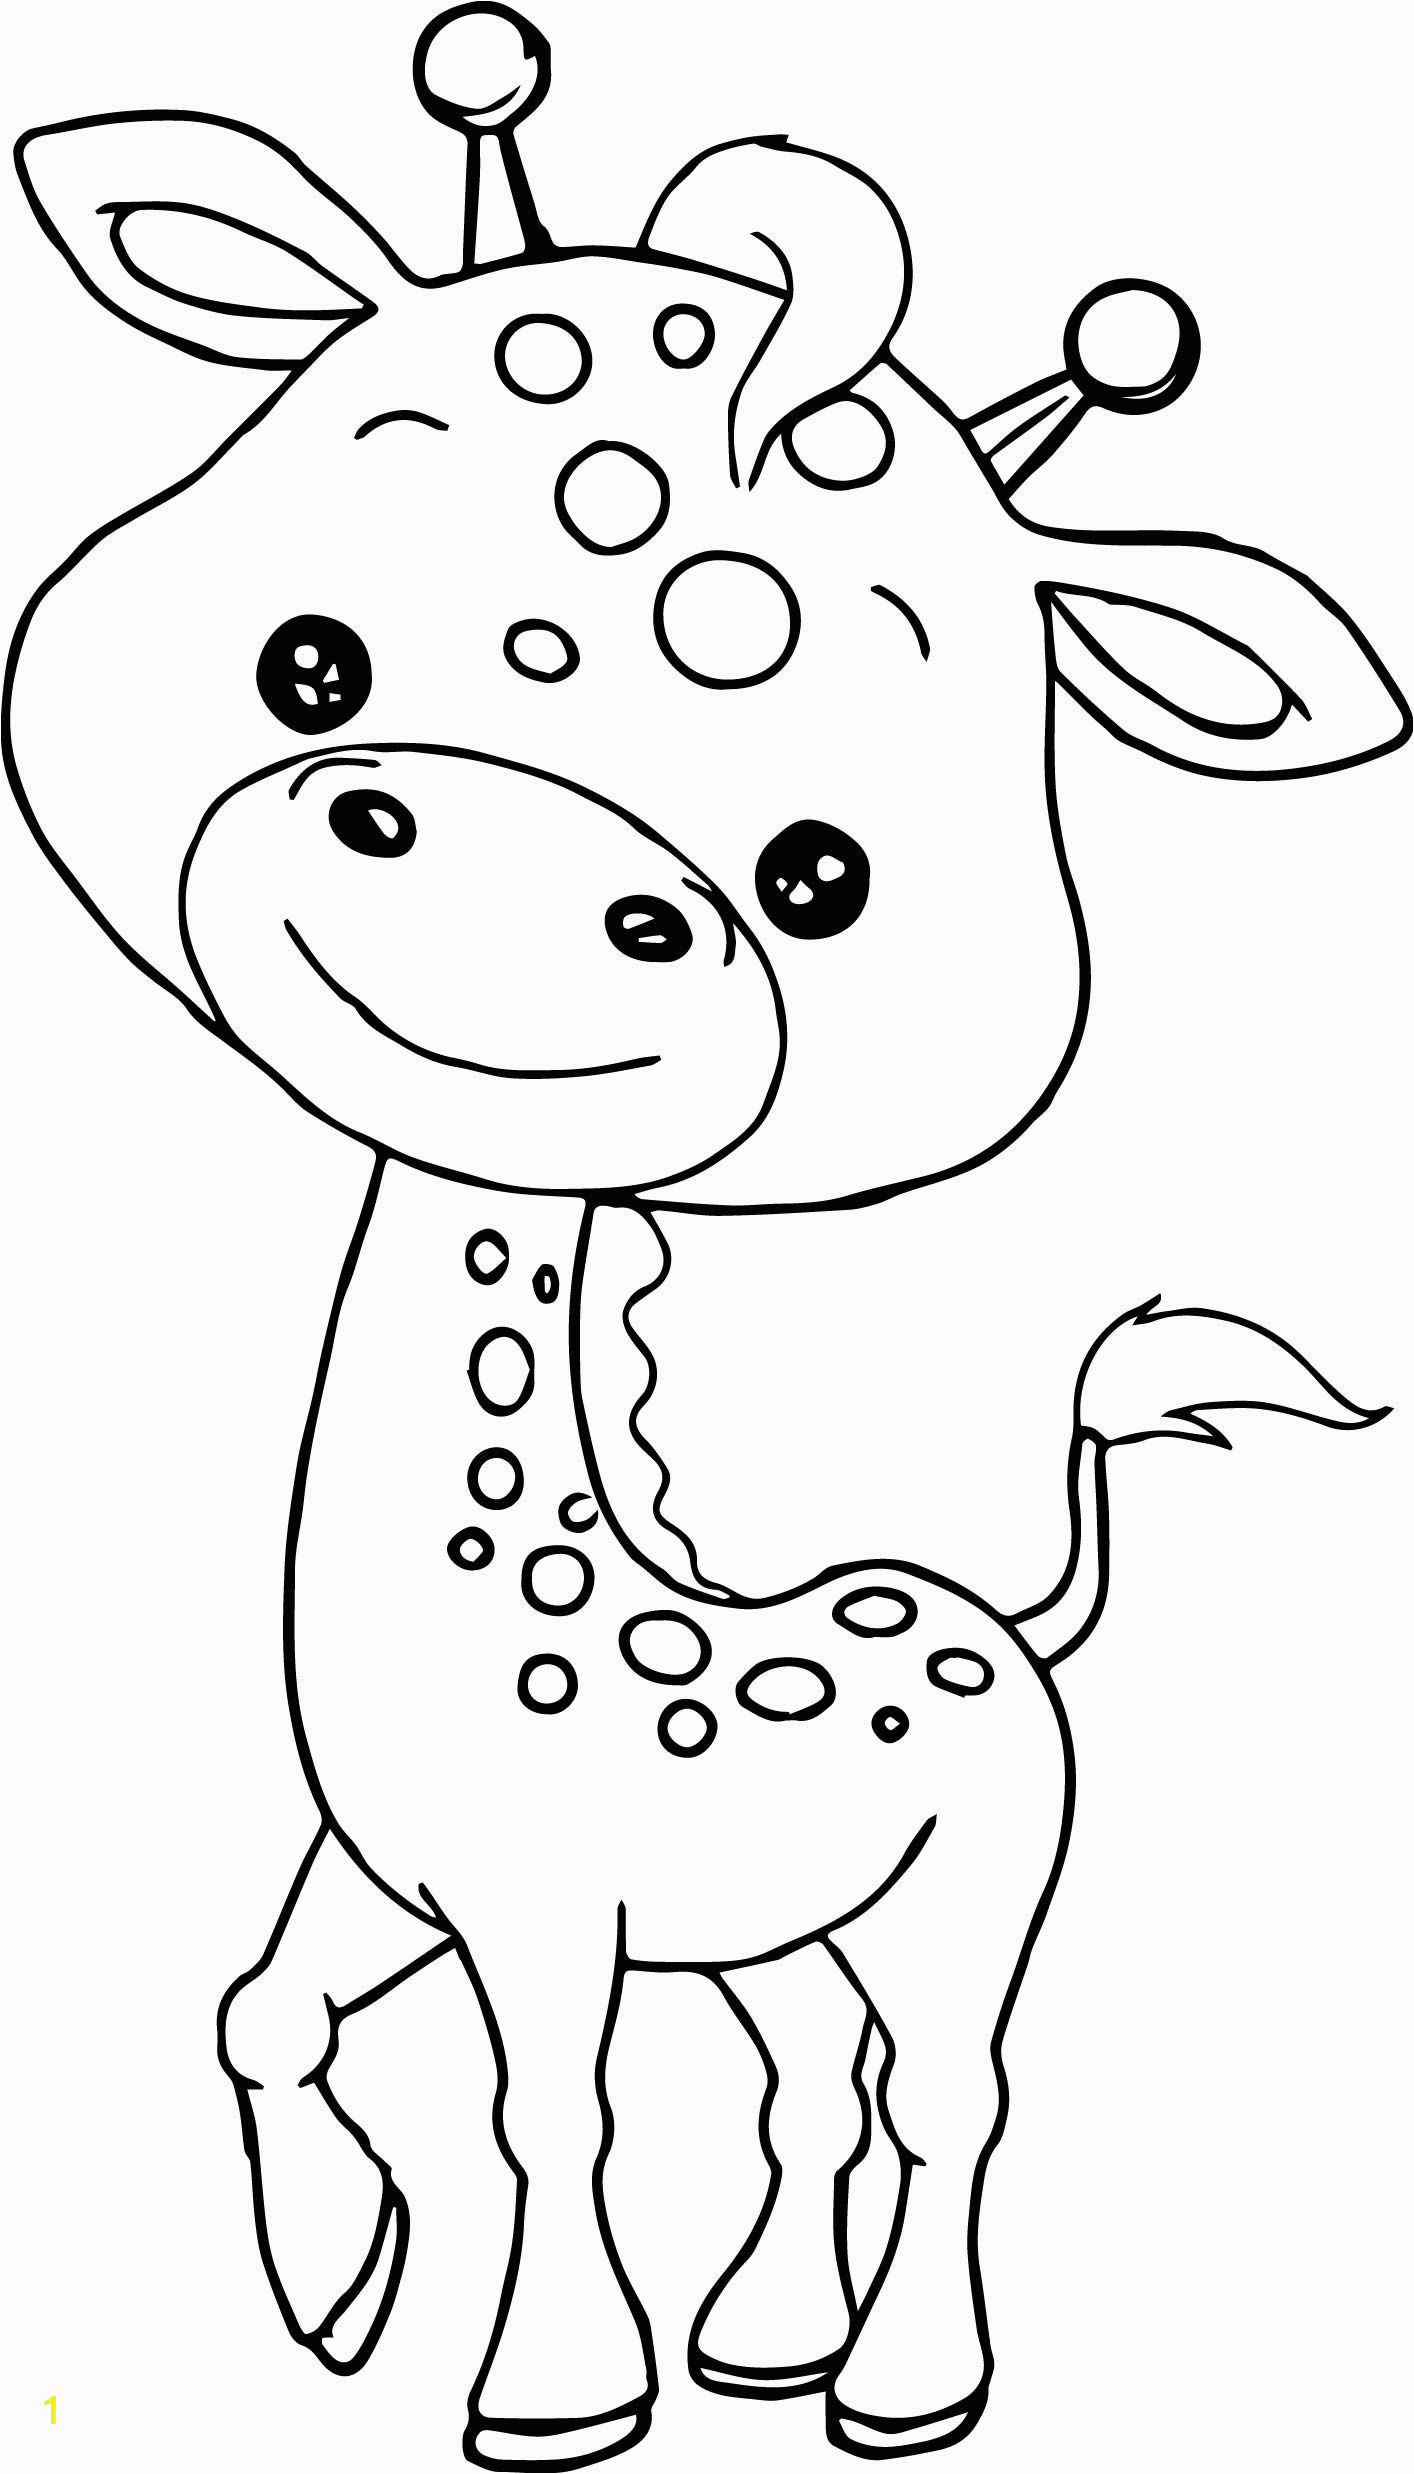 Coloring Pages Of Baby Zoo Animals Awesome Baby Jungle Free Animal Coloring Page